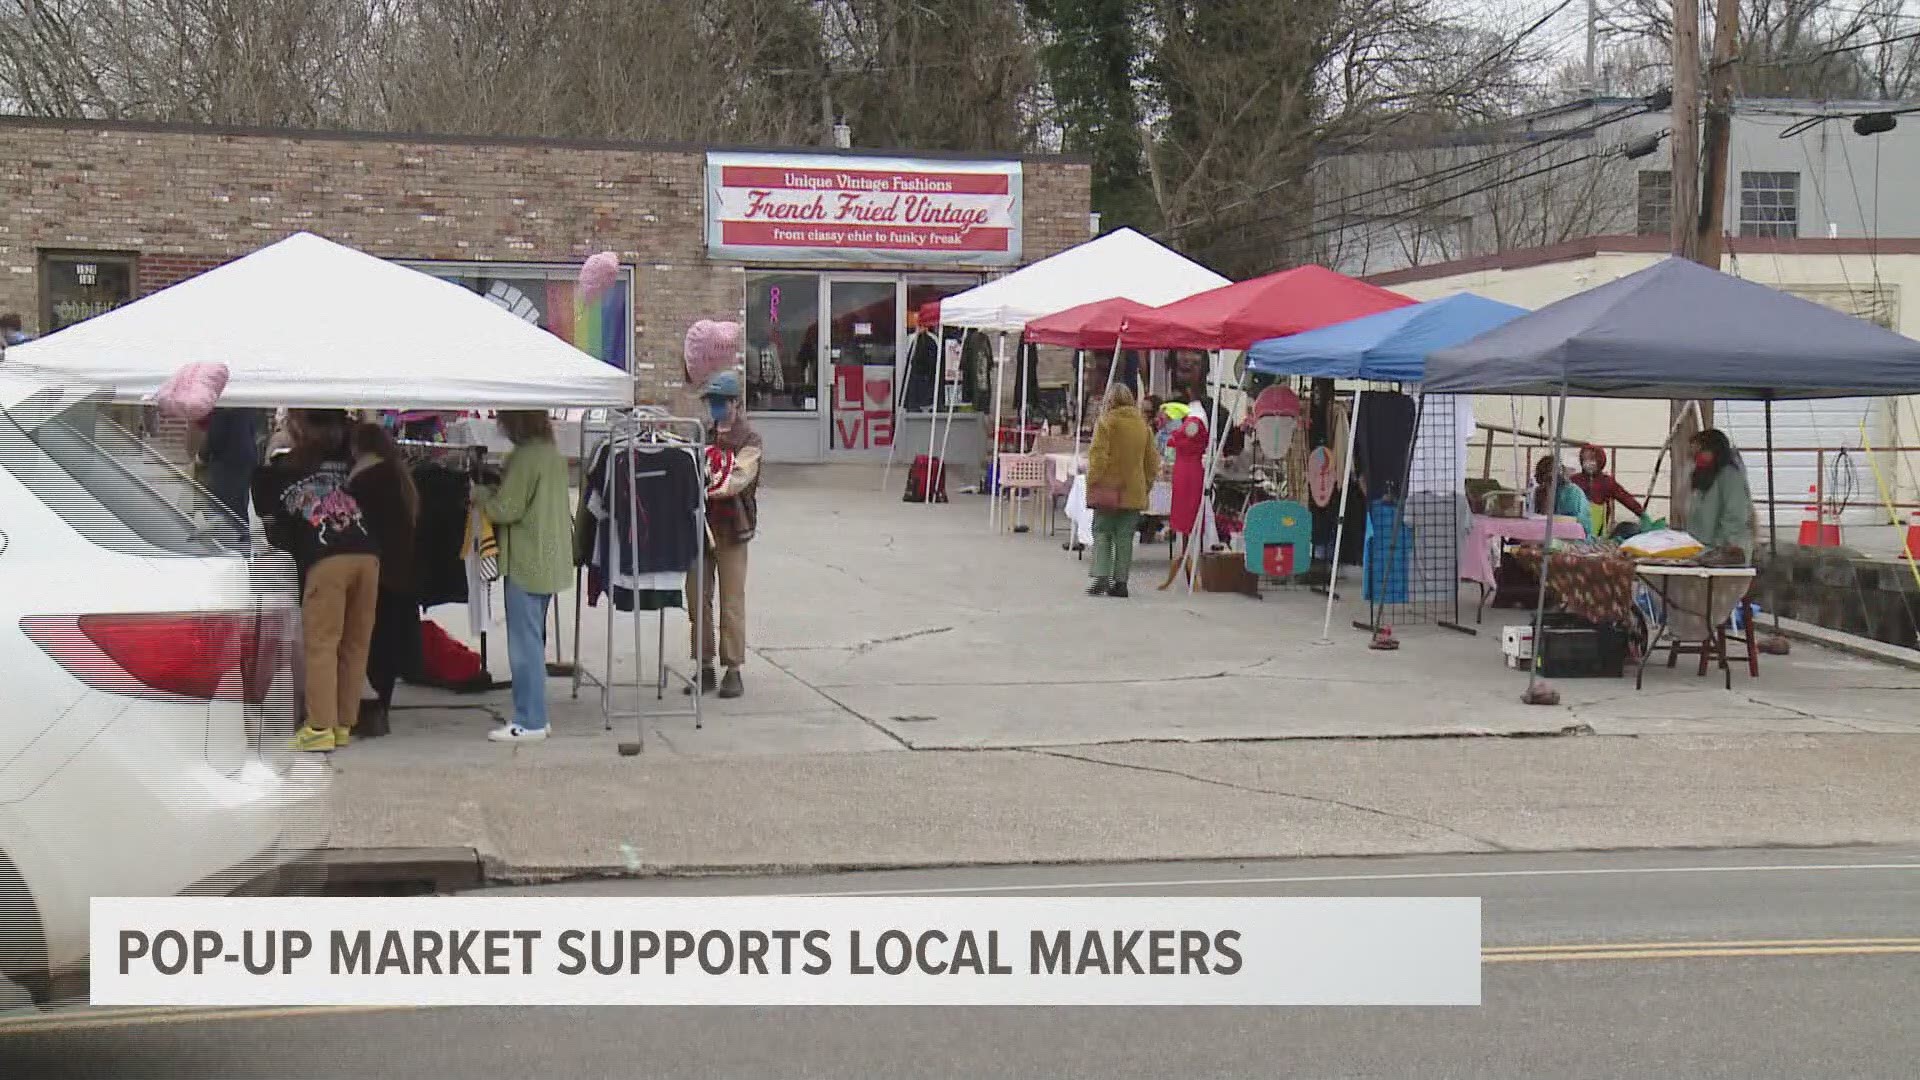 Visual Storyteller Alex Myers went to the market Sunday to see how it's helping local makers during COVID-19.